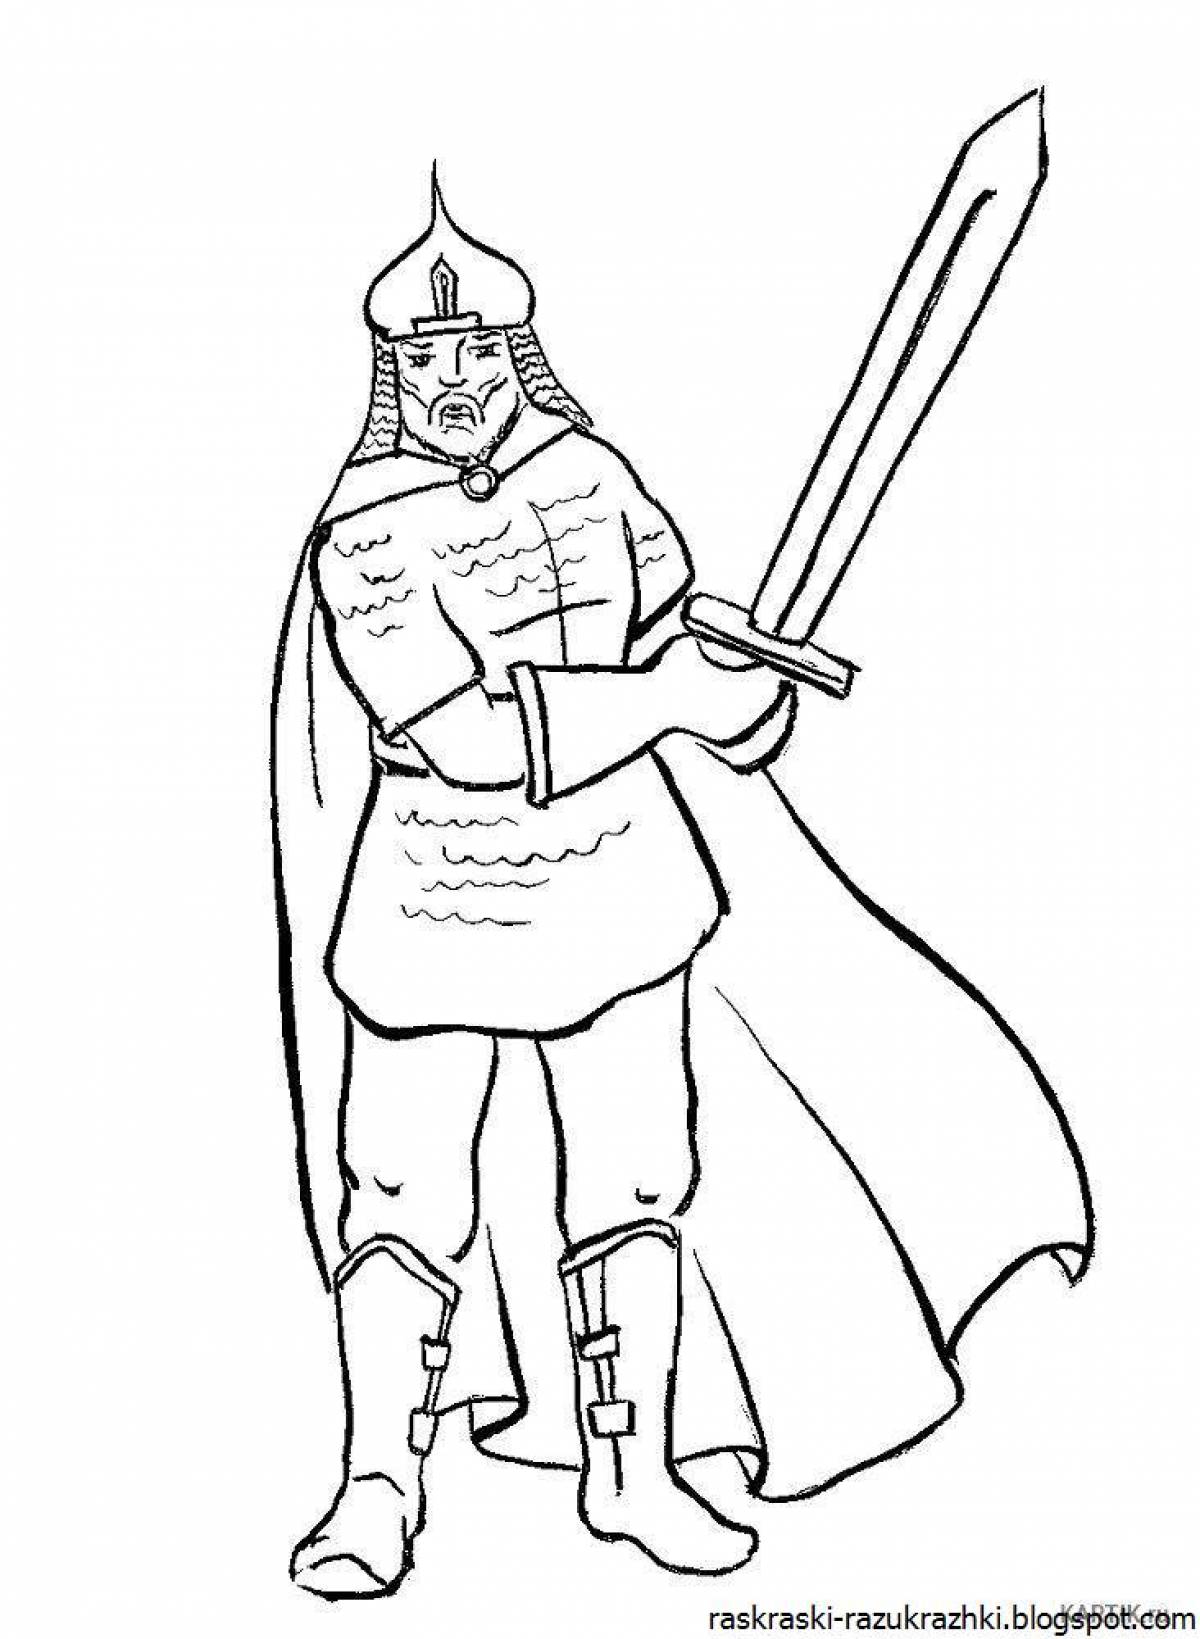 Amazing coloring pages of Russian heroes for kids